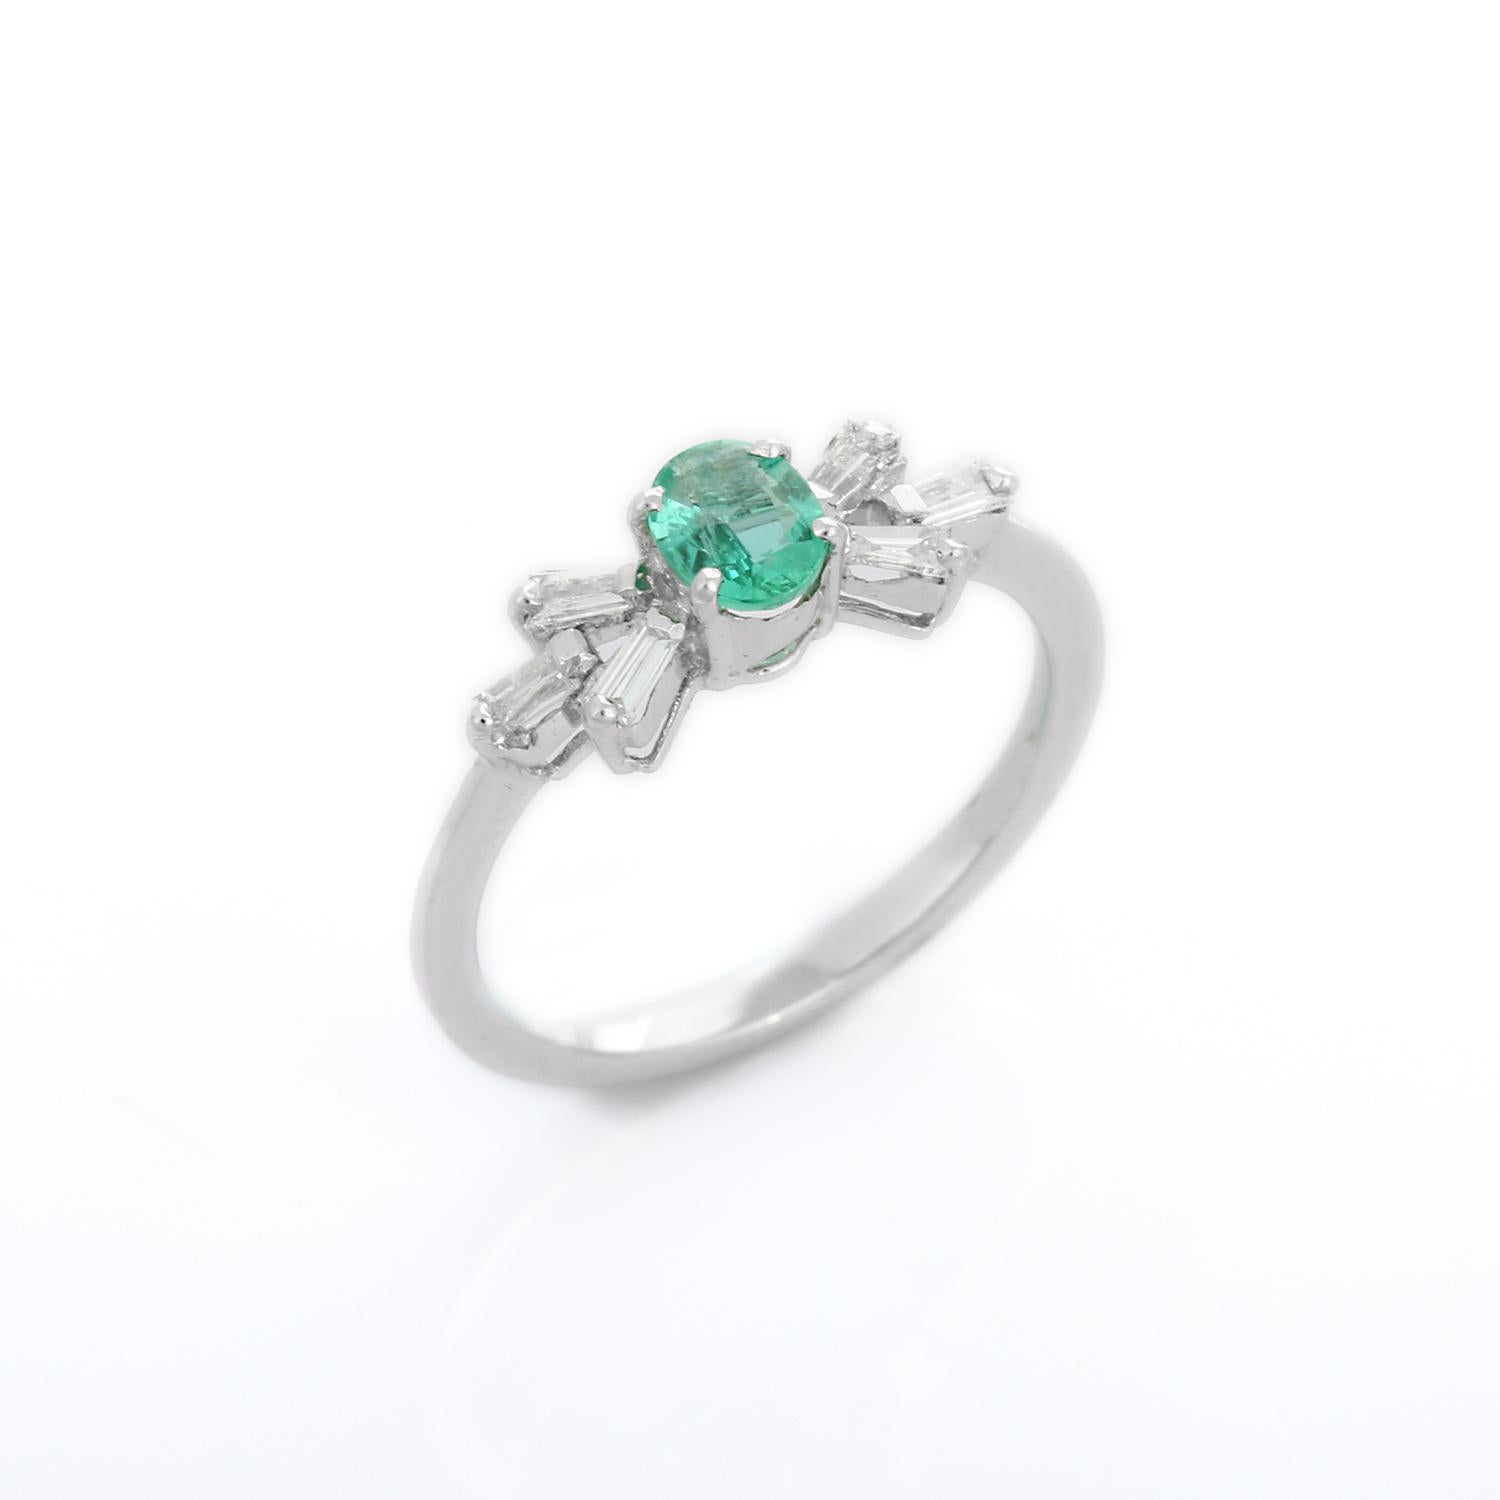 For Sale:  Emerald and Diamond Ring in 18K White Gold  7